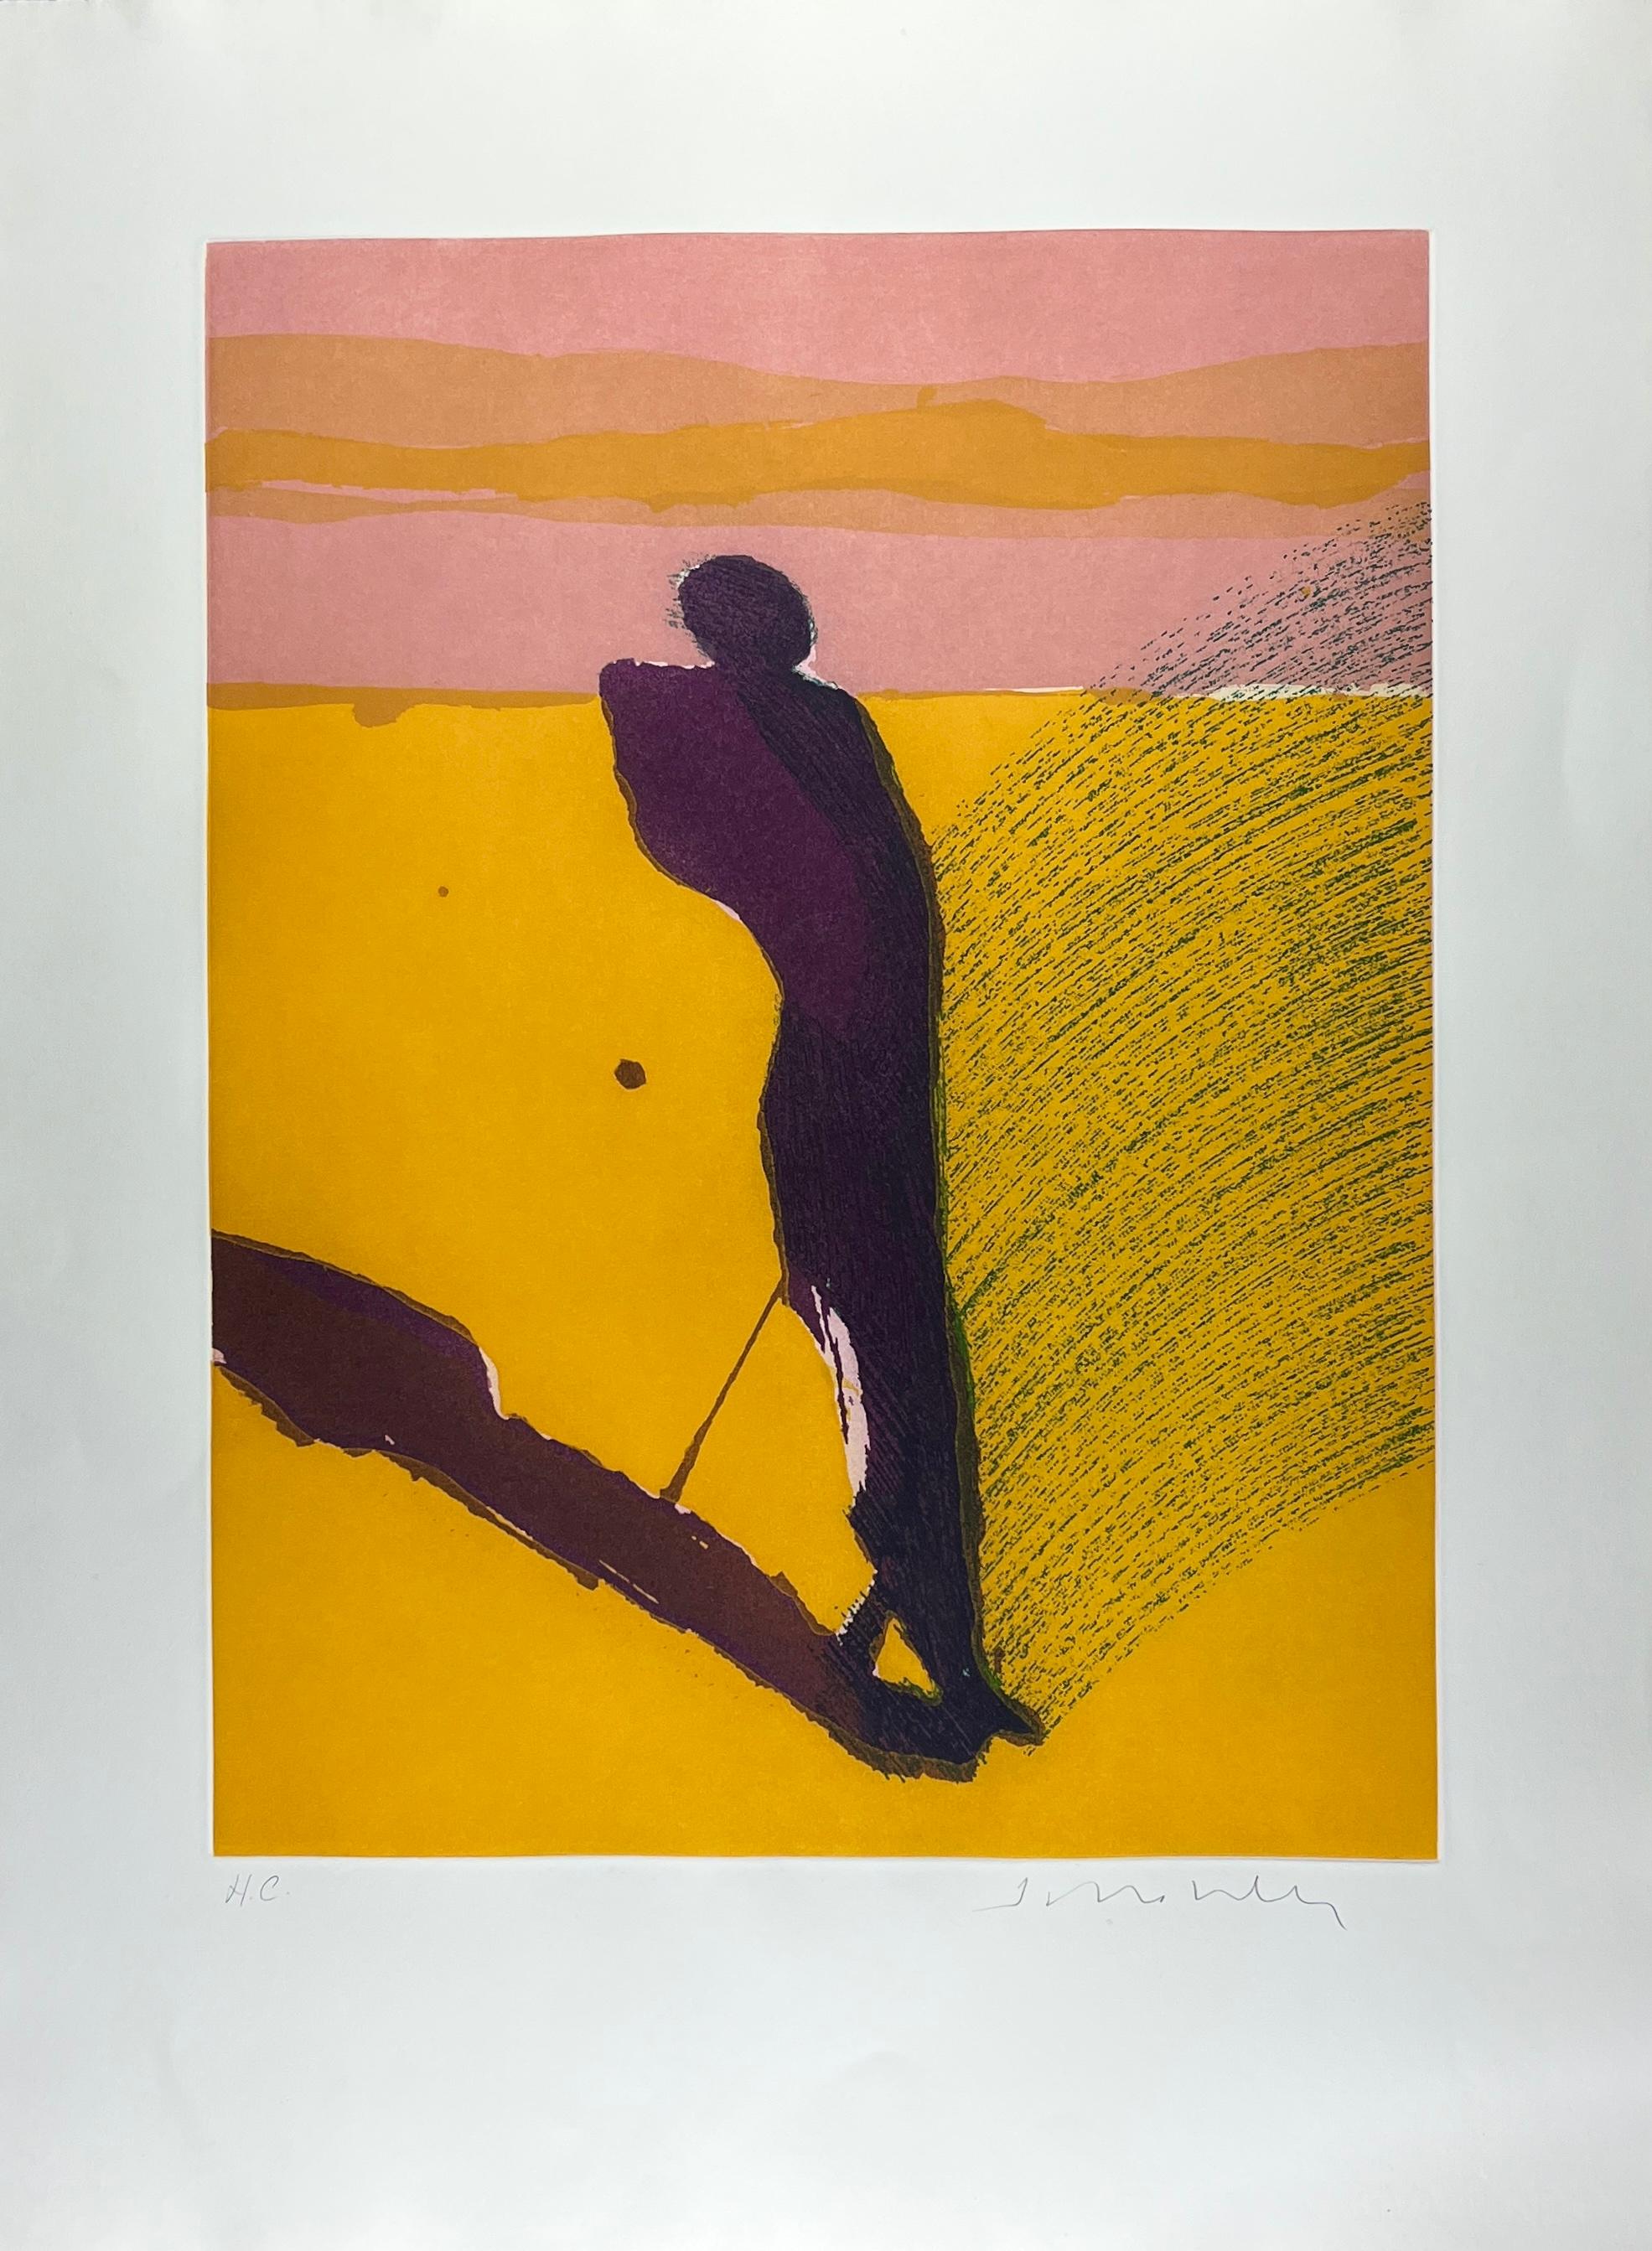 Fritz Scholder (United States, 1937-2005)
'Untitled 2', 
engraving on paper
30 x 22.1 in. (76 x 56 cm.)
ID: SCH1341-008-000
Unframed